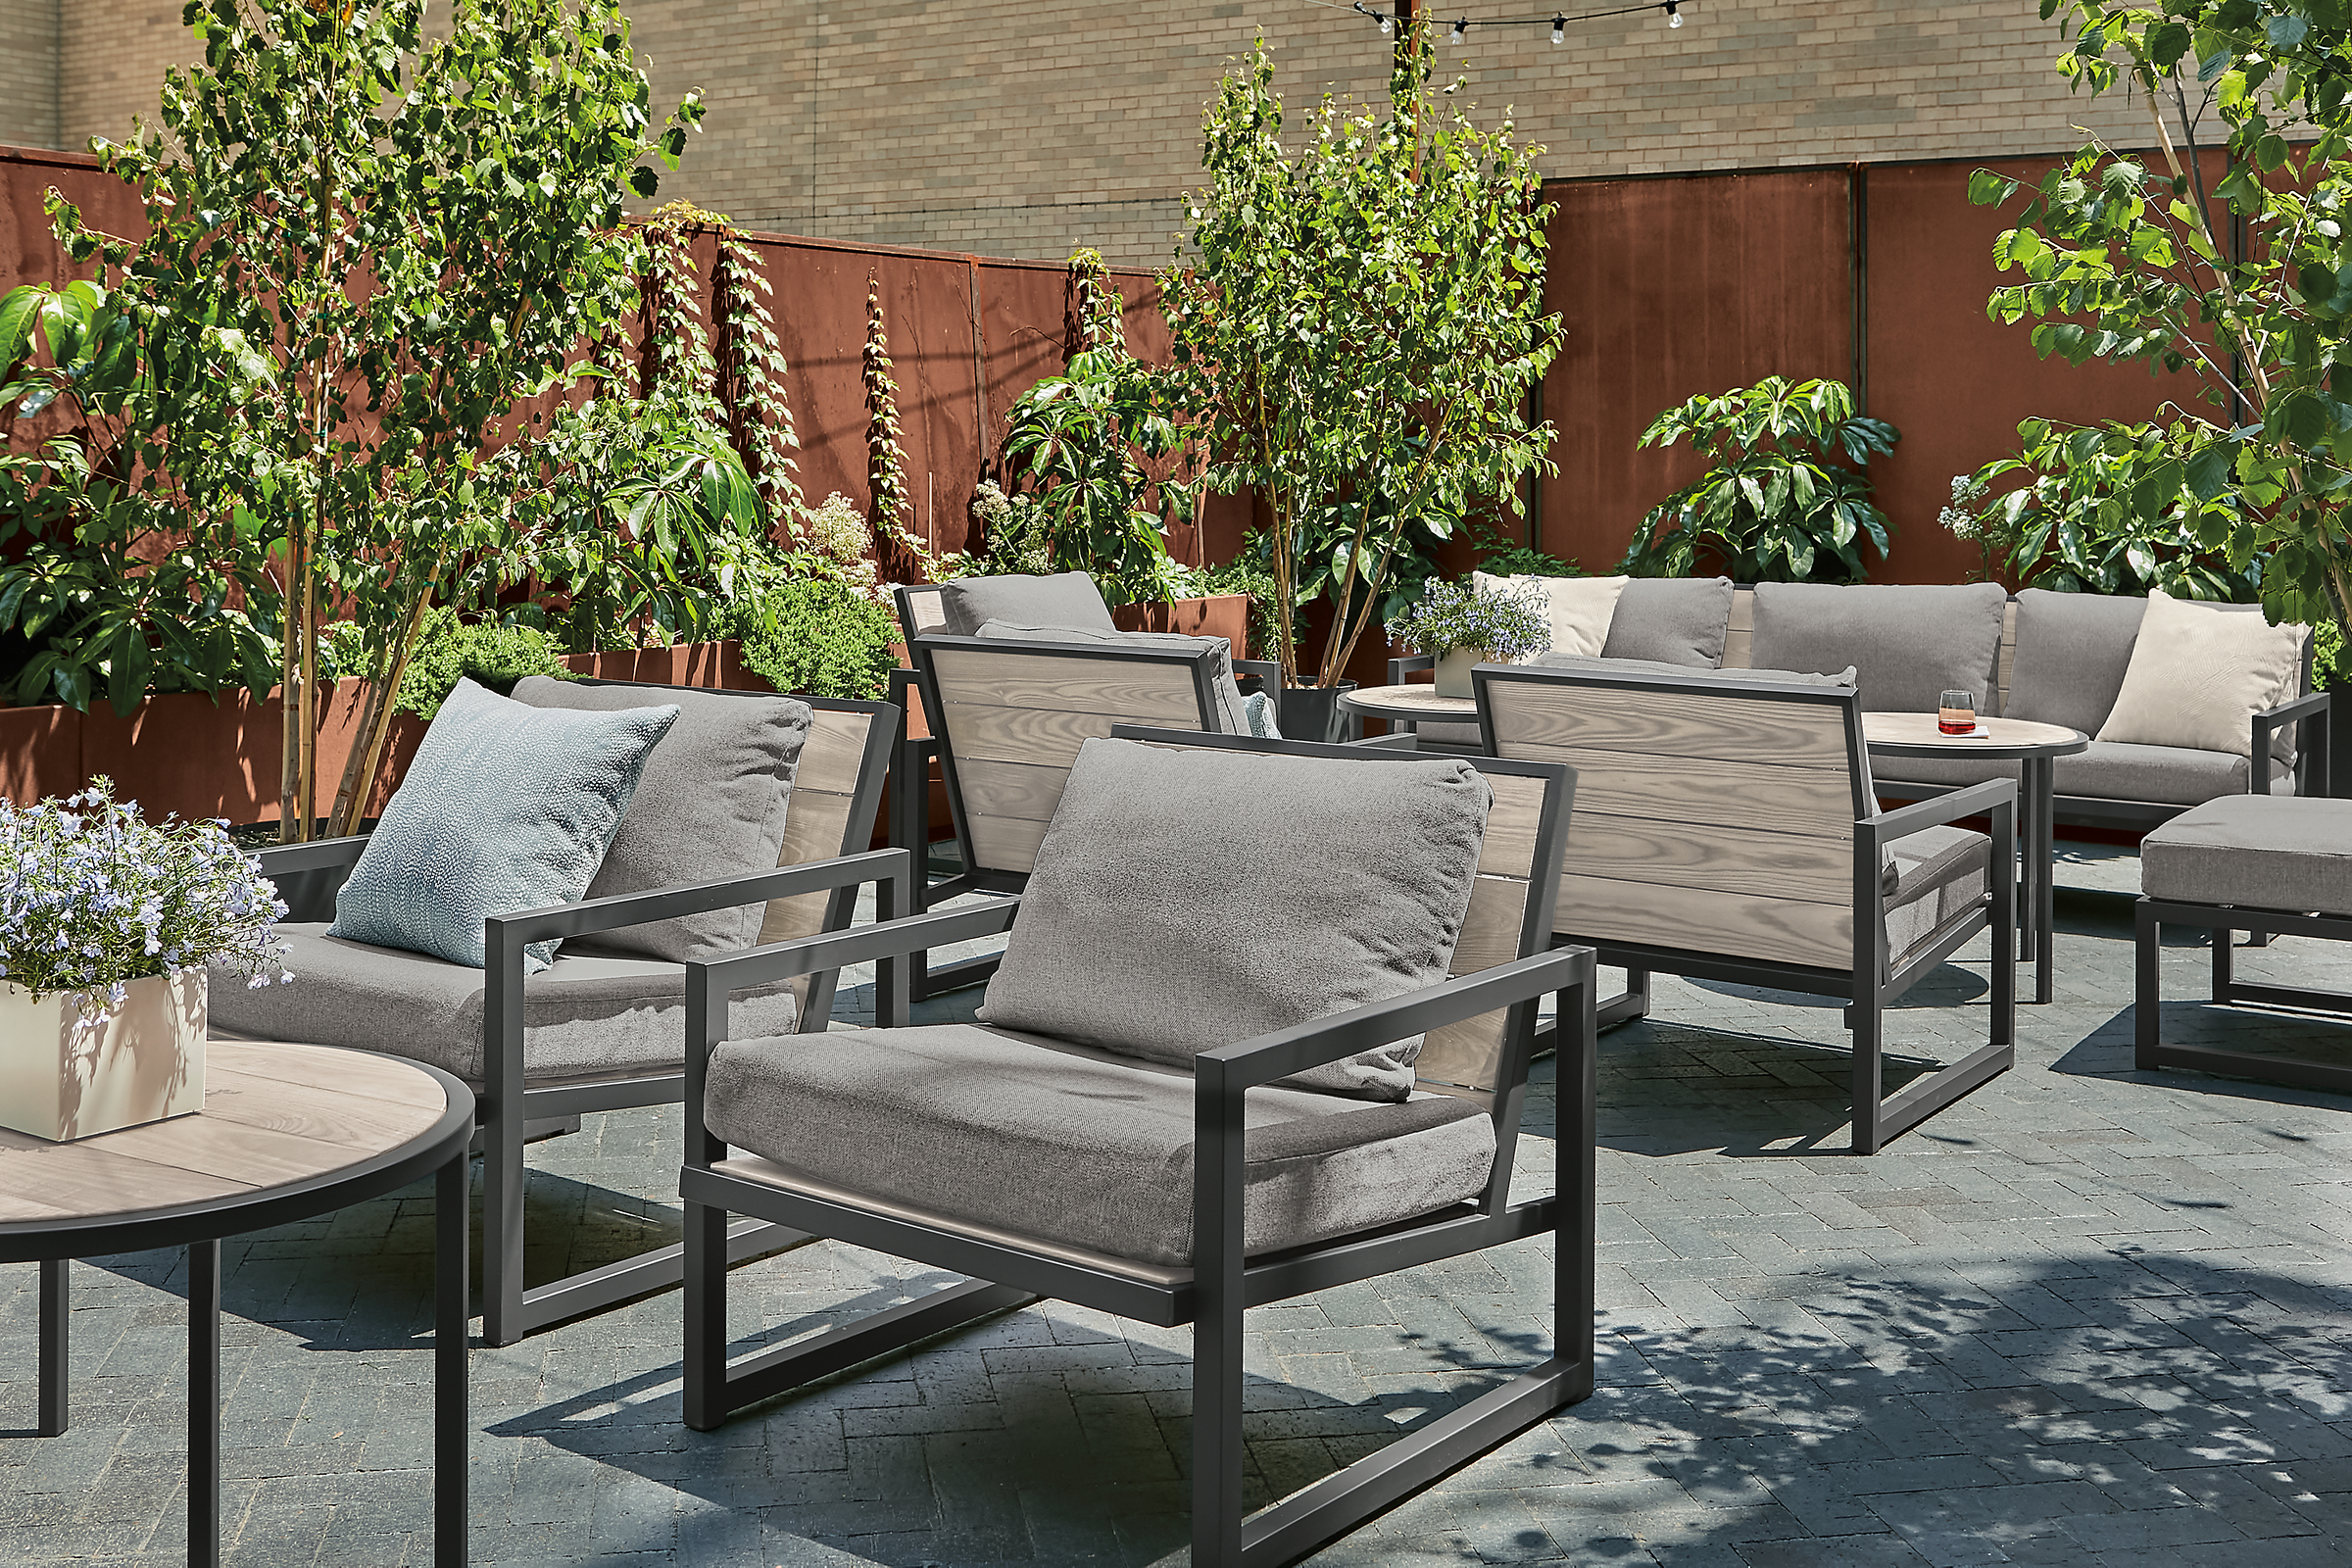 Outdoor lounge space with aged thermally modified ash montego chairs and sofas with cushions.